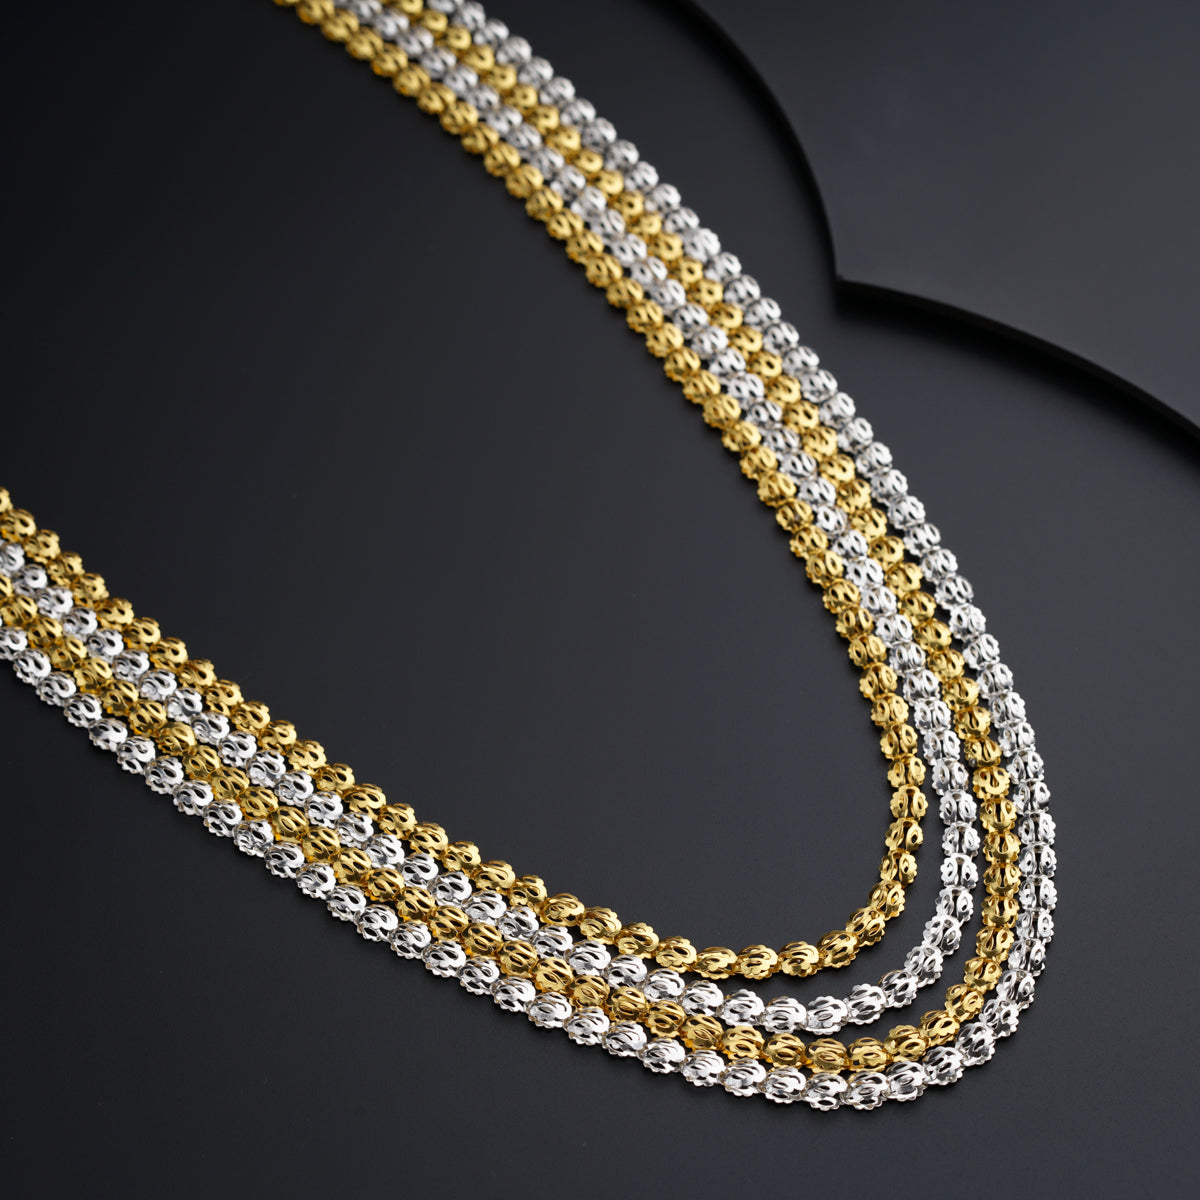 a gold and silver chain on a black surface